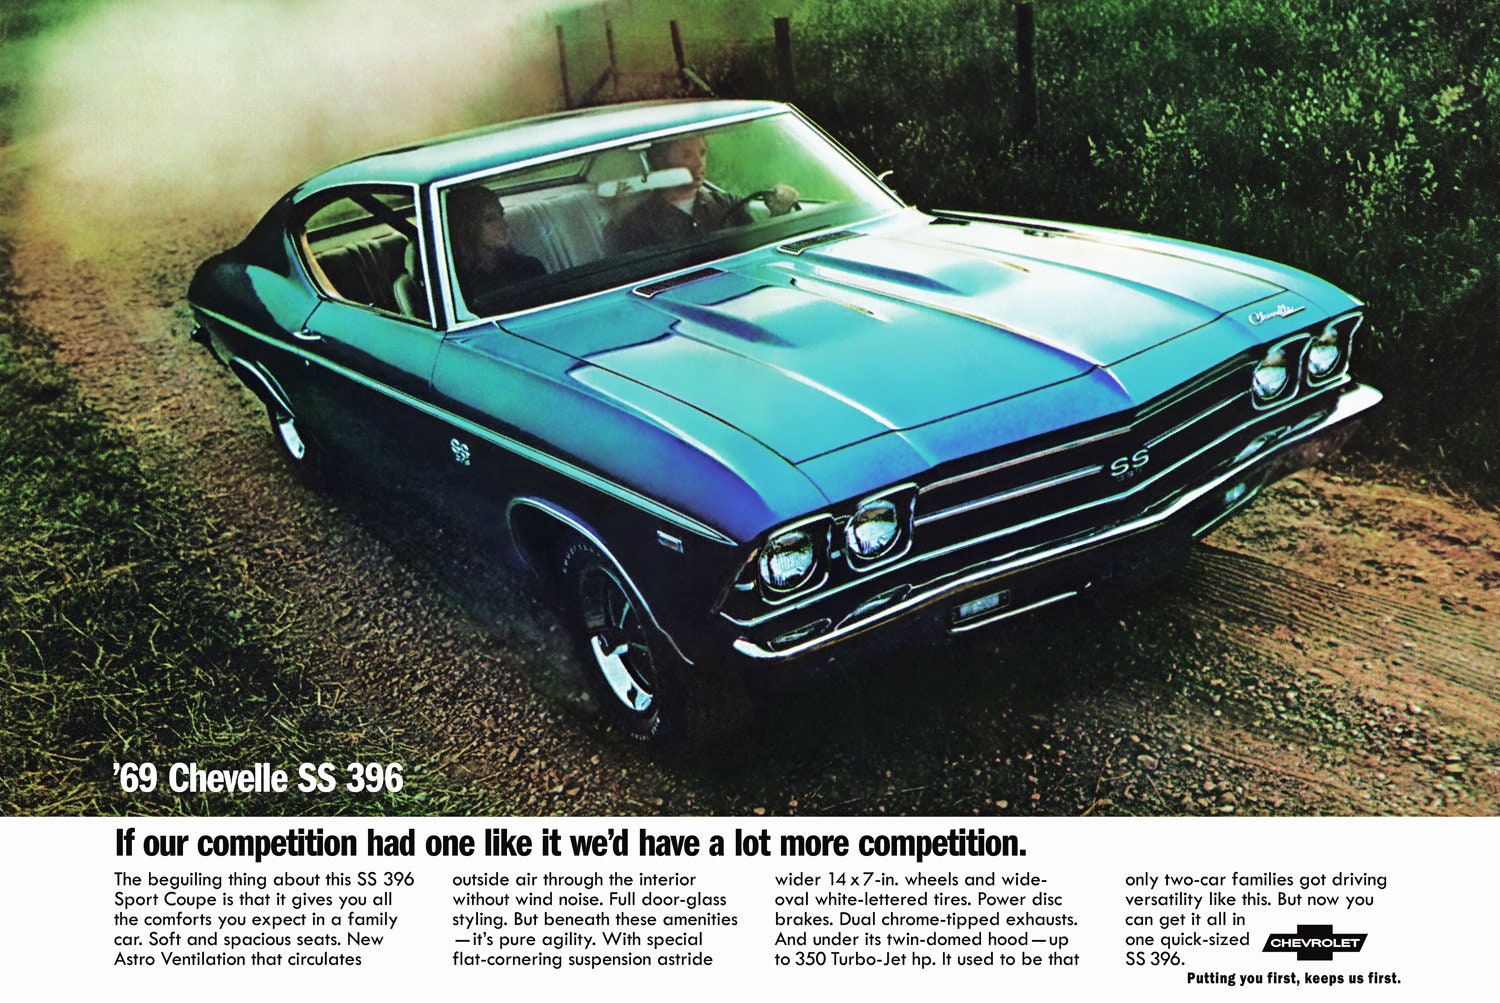 Details About 1969 Chevrolet Chevelle Ss 396 Large Format Ad Had One Like It